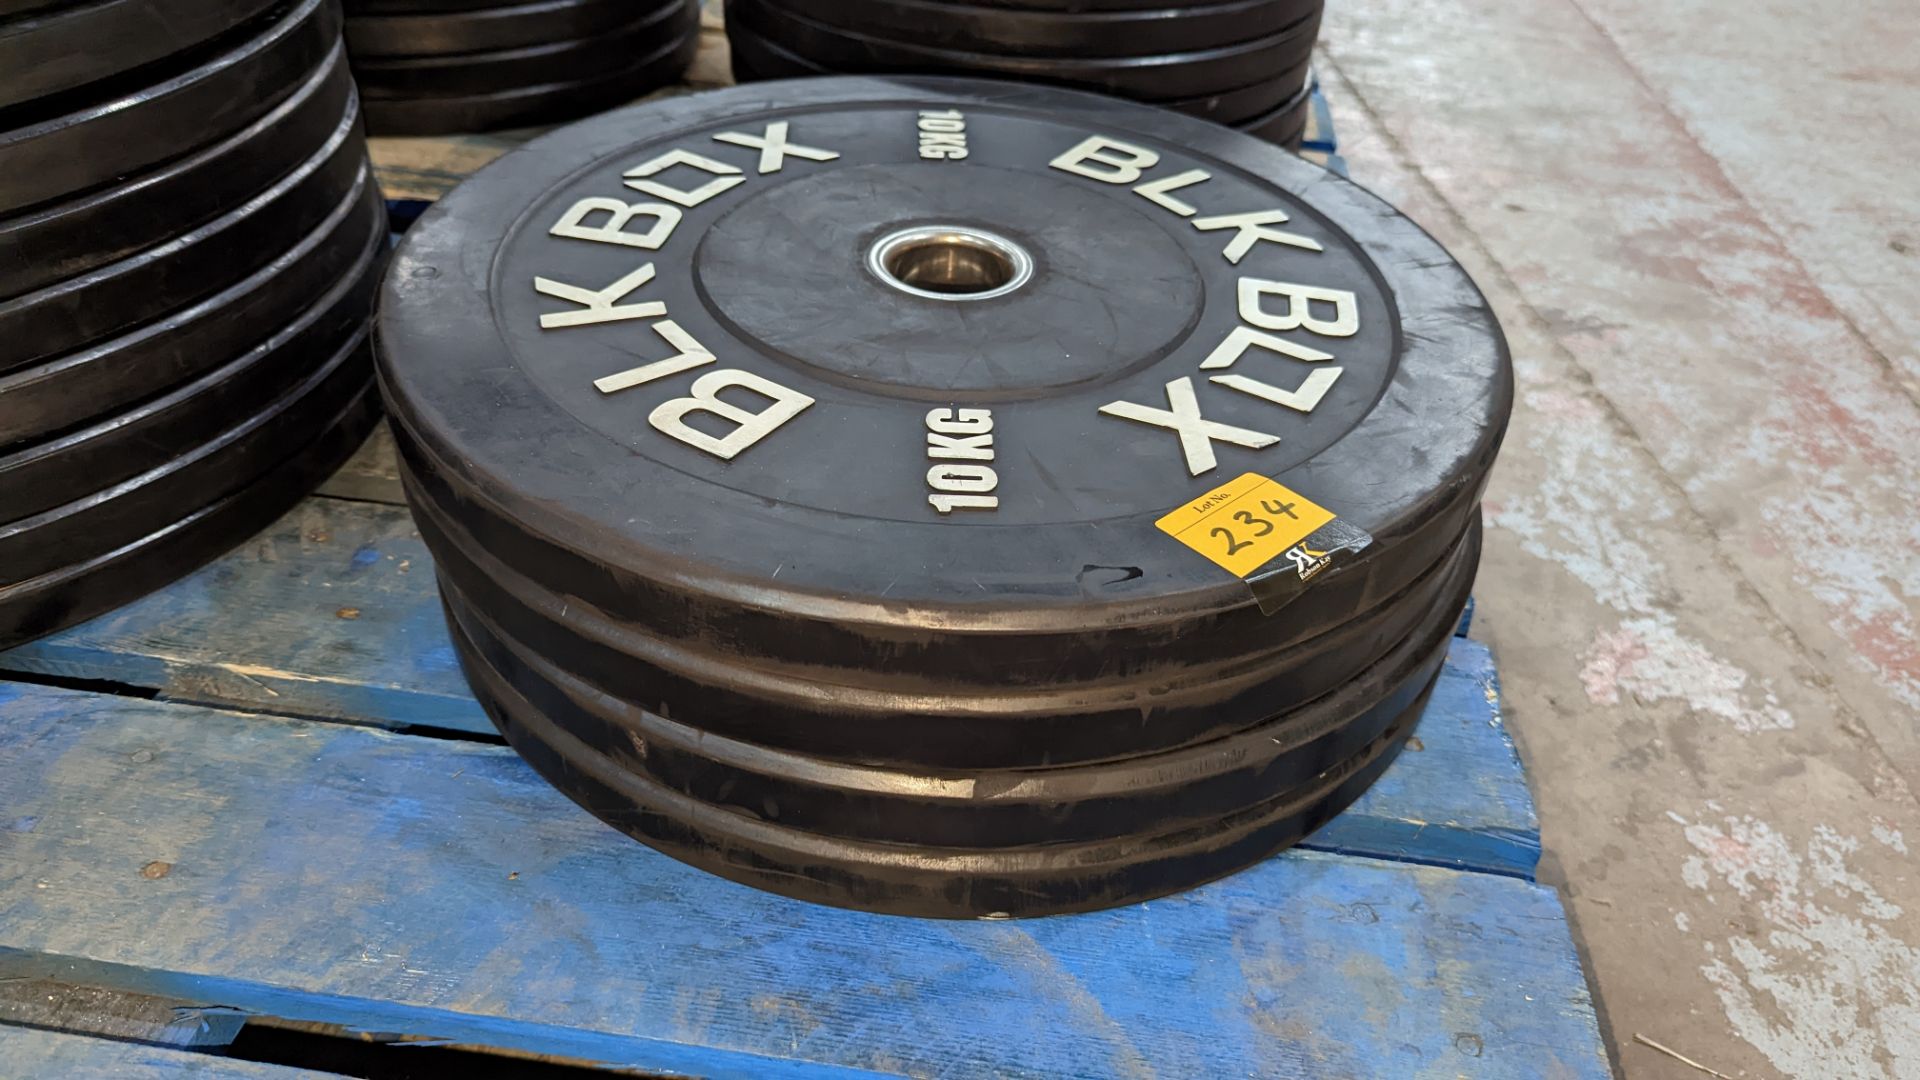 4 off BLKBOX 10kg rubberised Olympic plates - Image 3 of 3